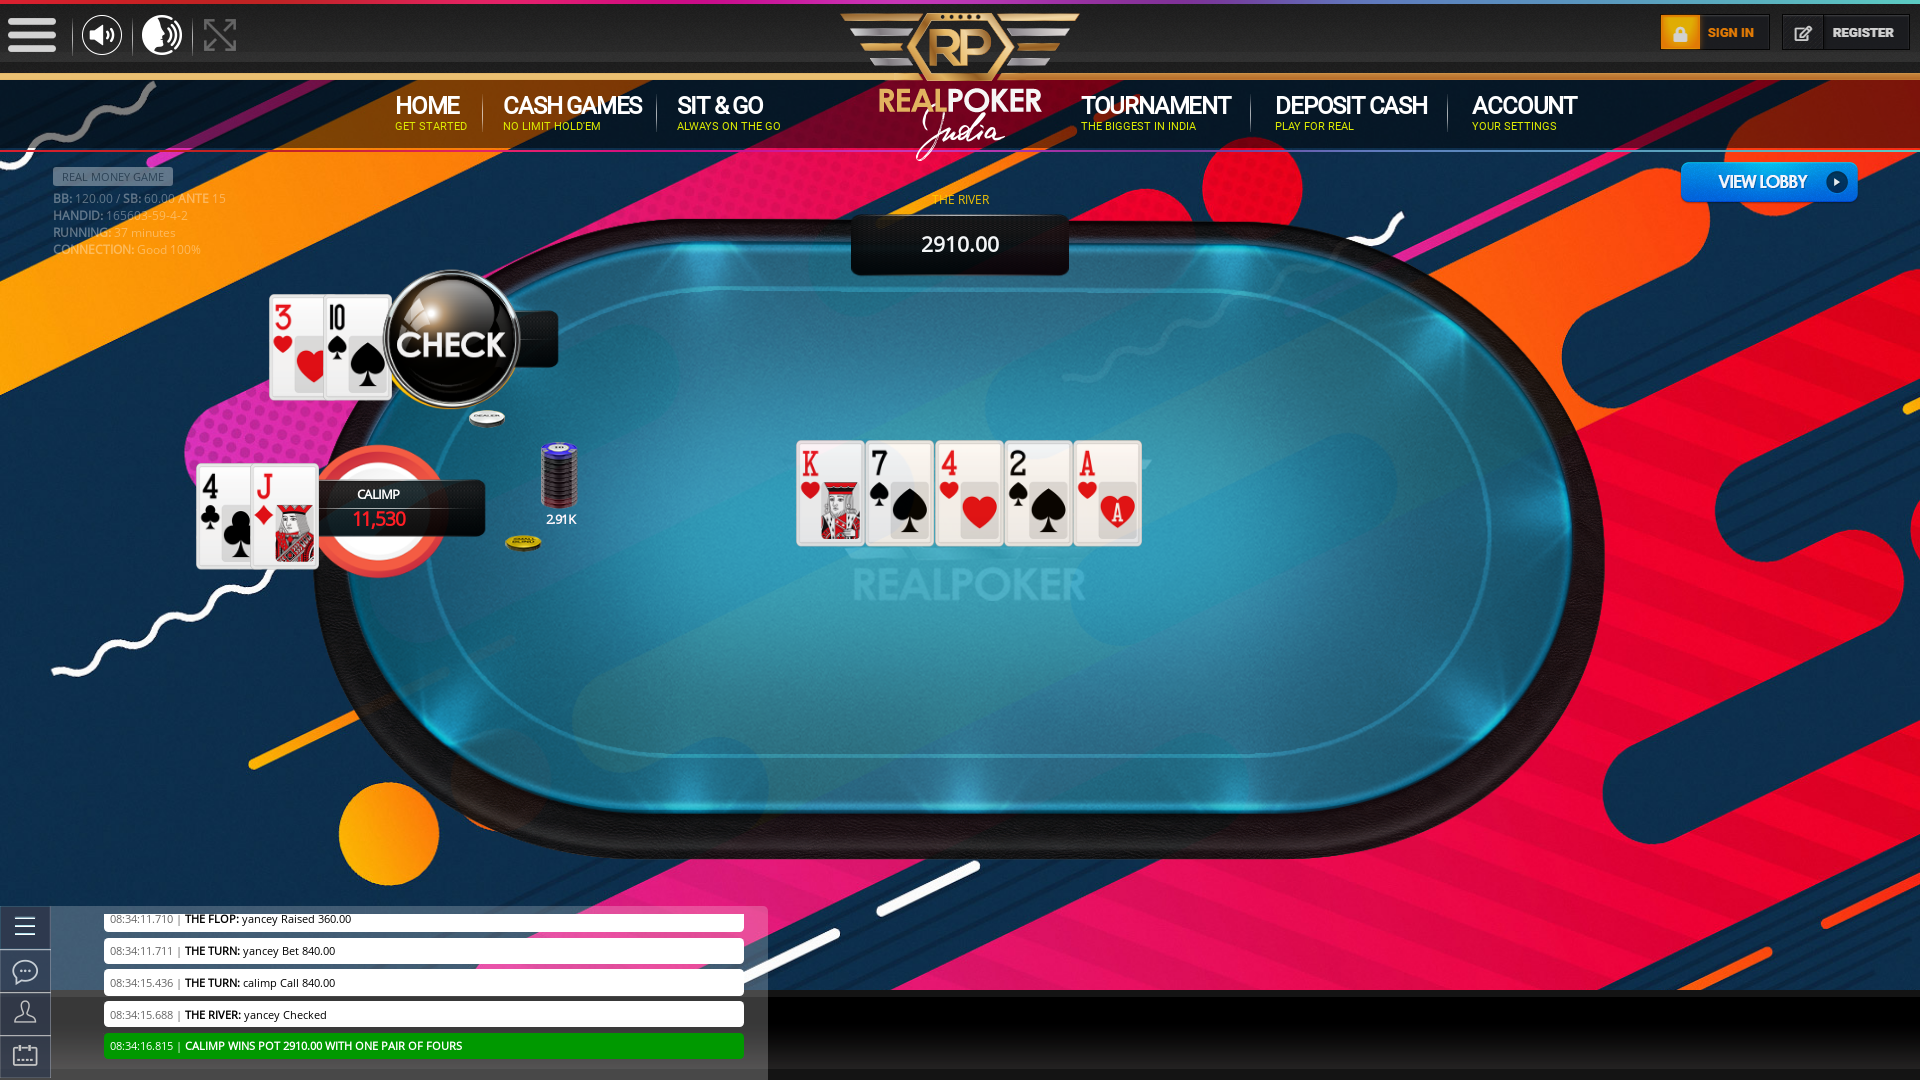 Goa real poker on a 10 player table in the 37th minute of the meeting